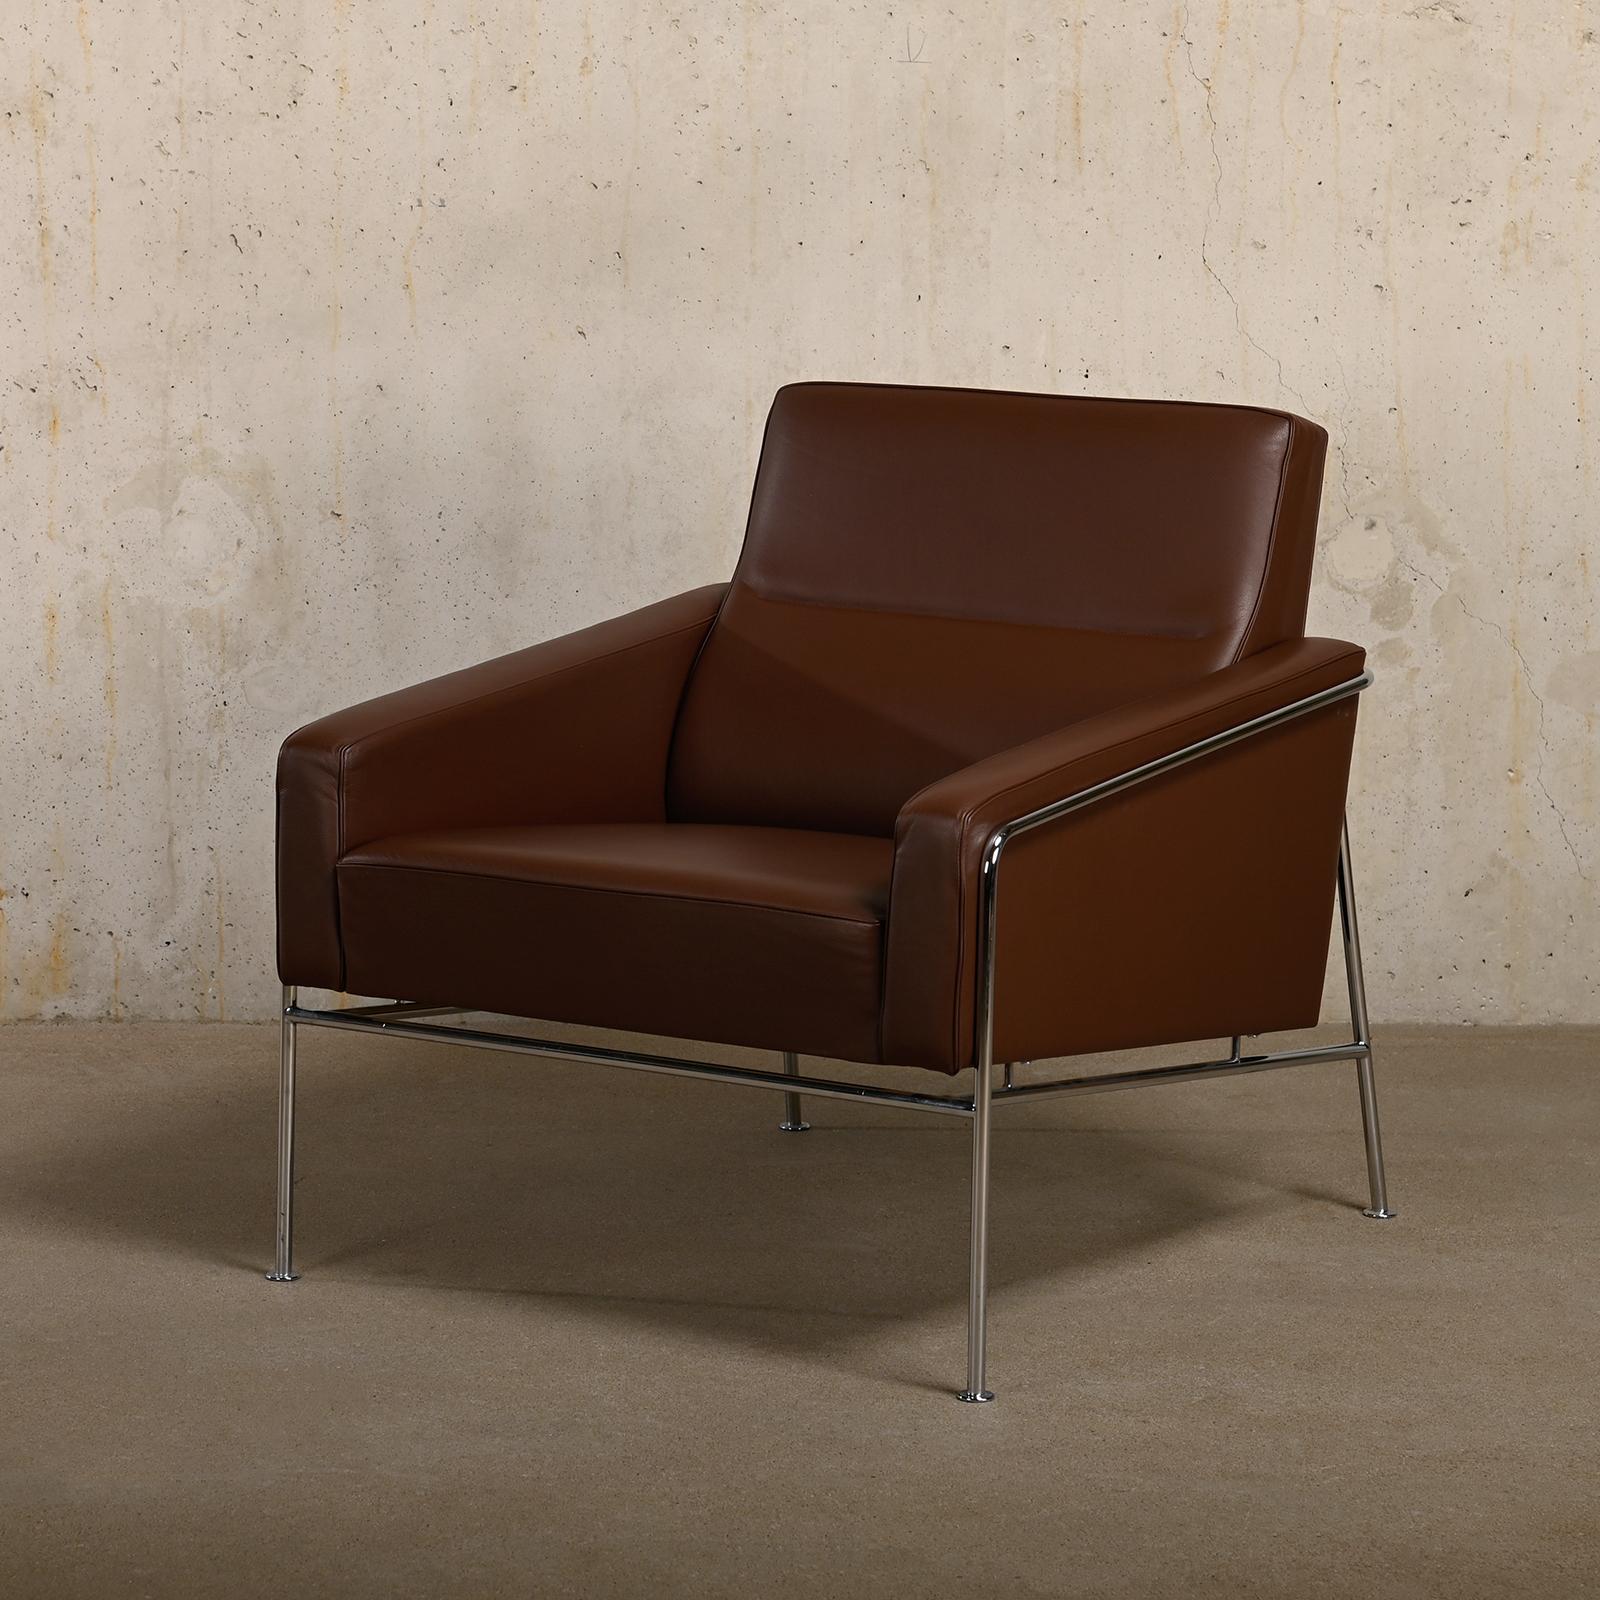 Metal Arne Jacobsen Pair Armchairs 3300 Series in Chestnut leather for Fritz Hansen For Sale